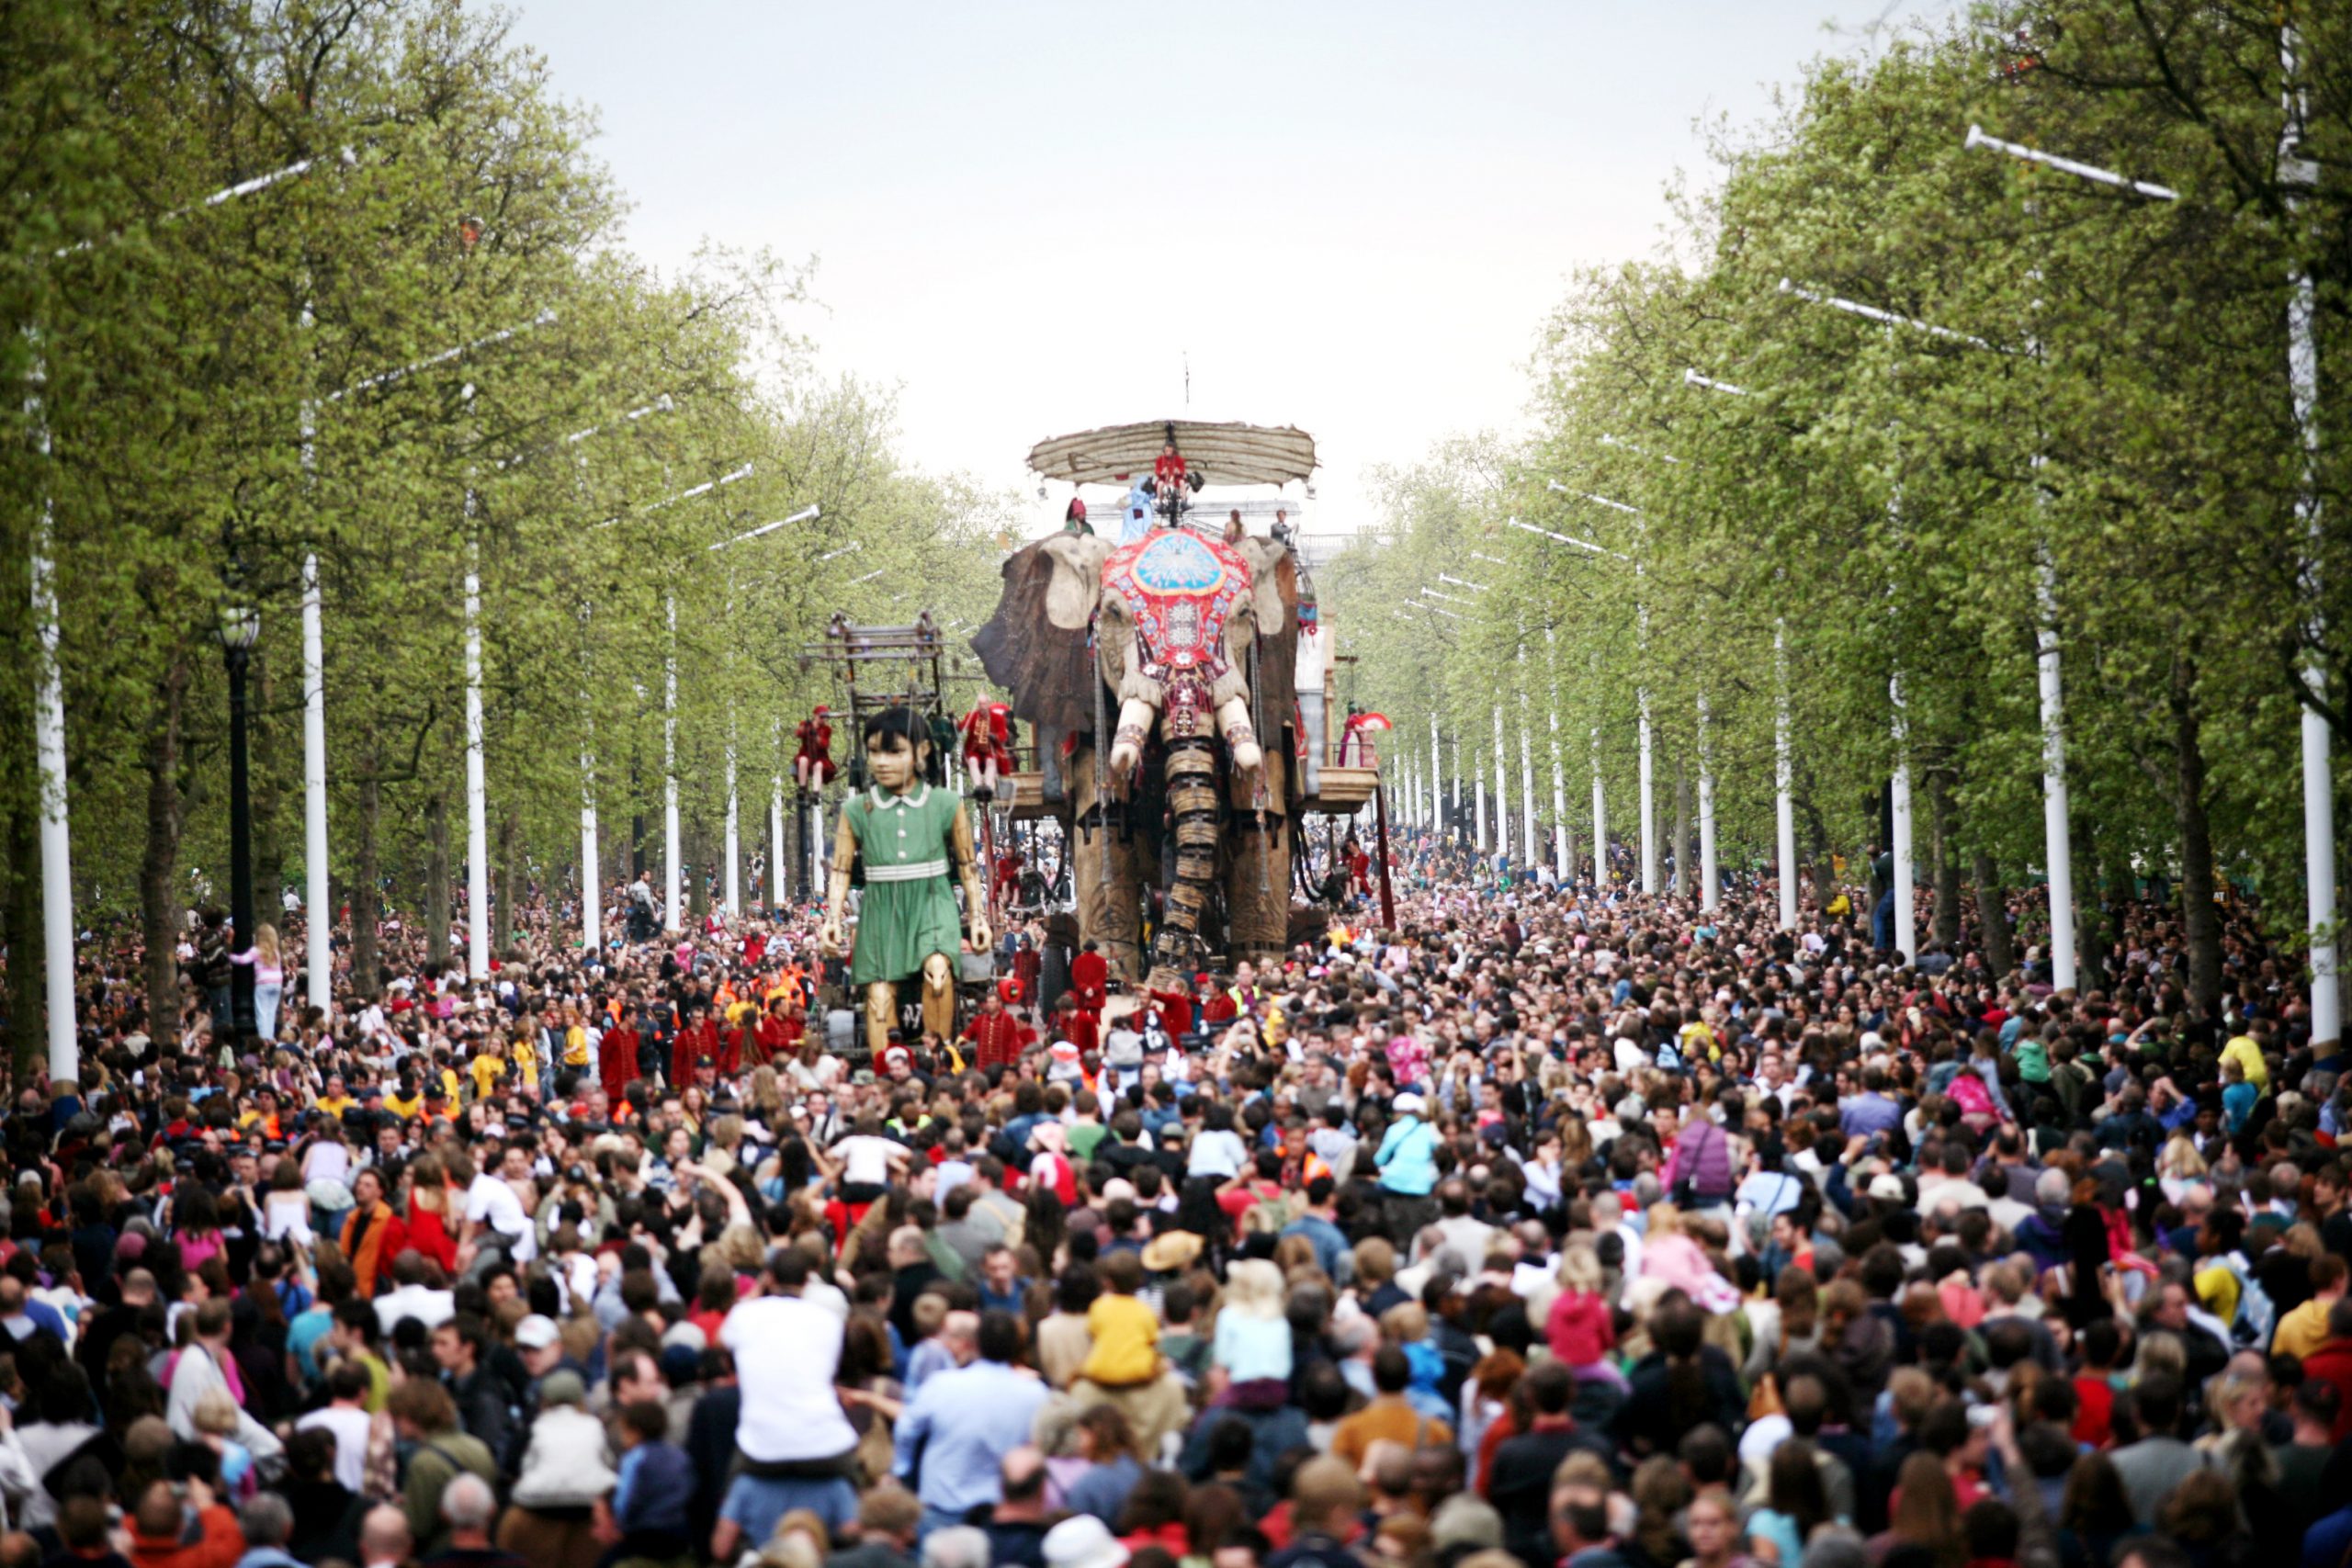 A giant puppet Elephant tin a public street filled with people.